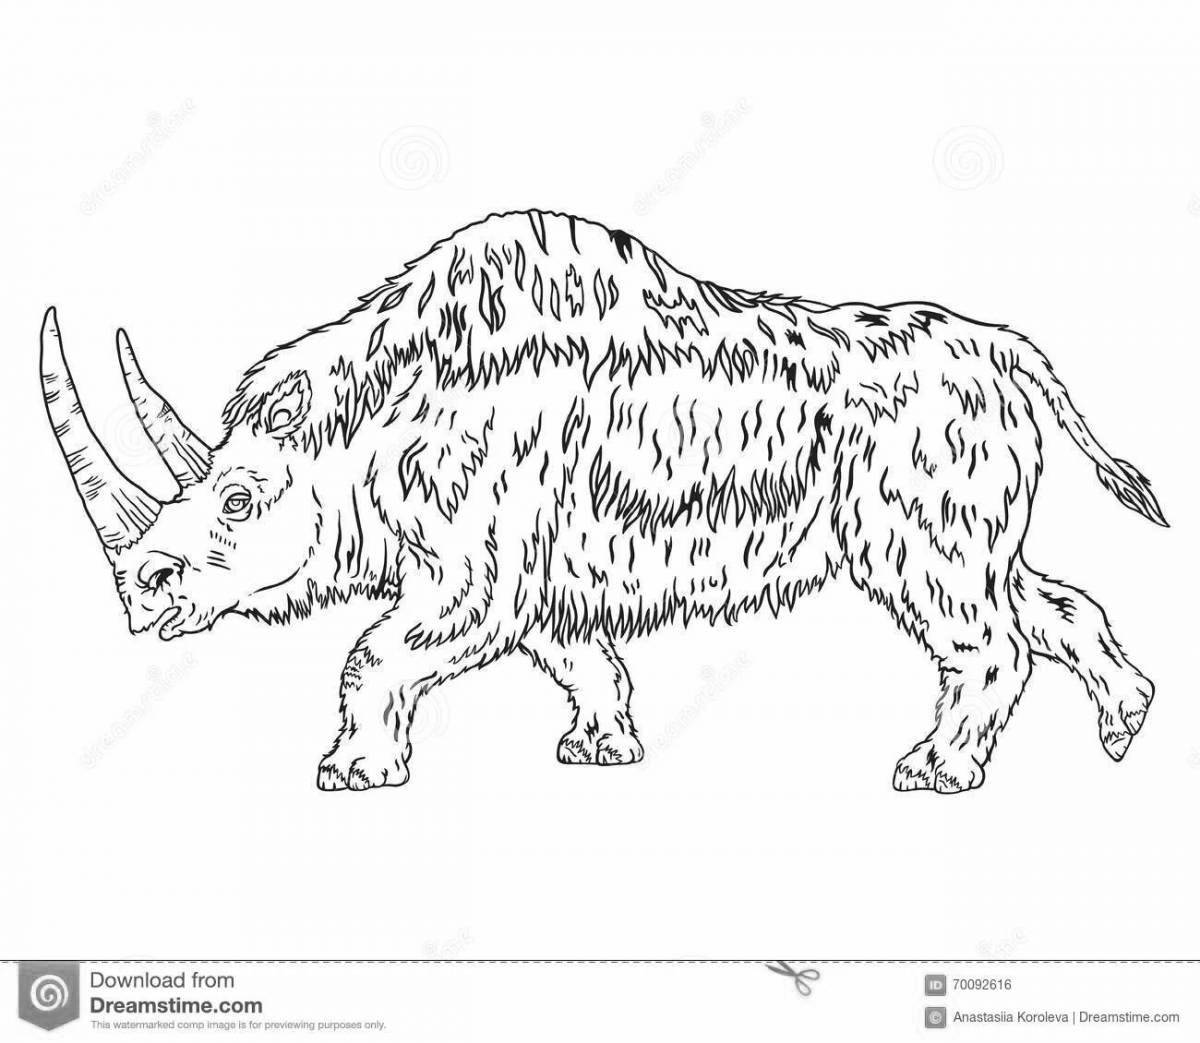 Awesome coloring pages of ancient animals